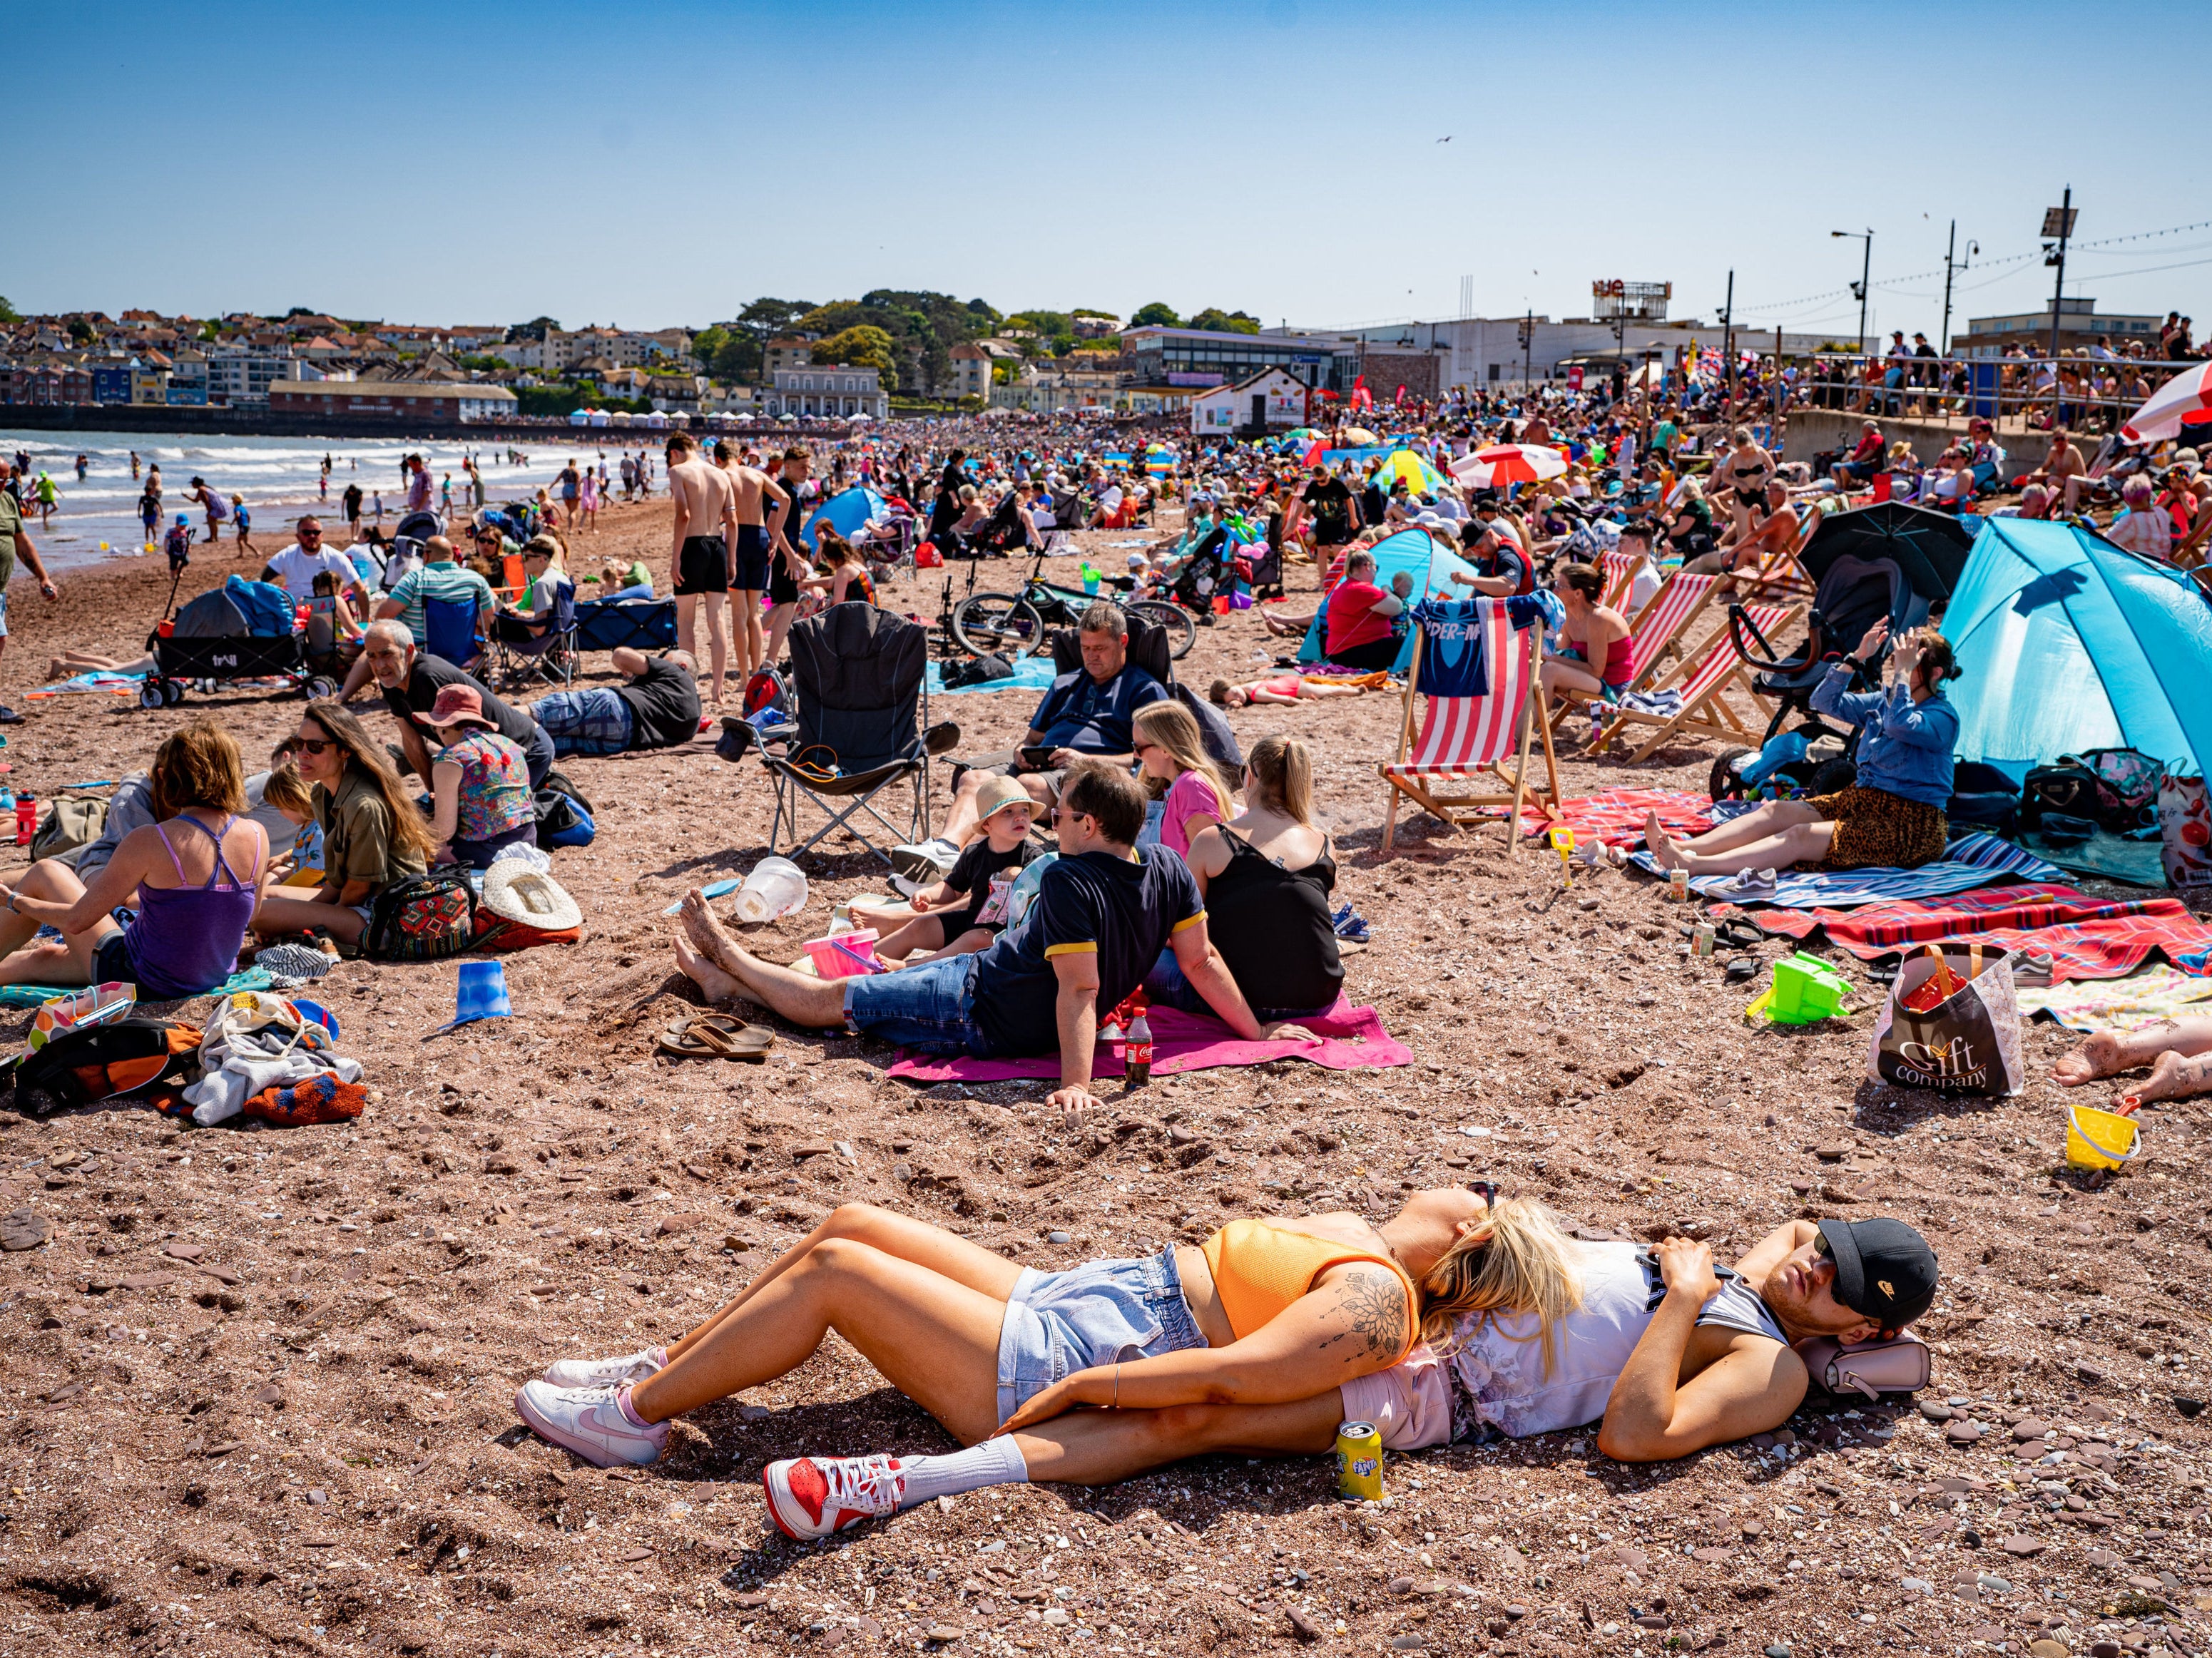 This weekend saw the hottest day of 2023 so far with temperatures reaching 32C